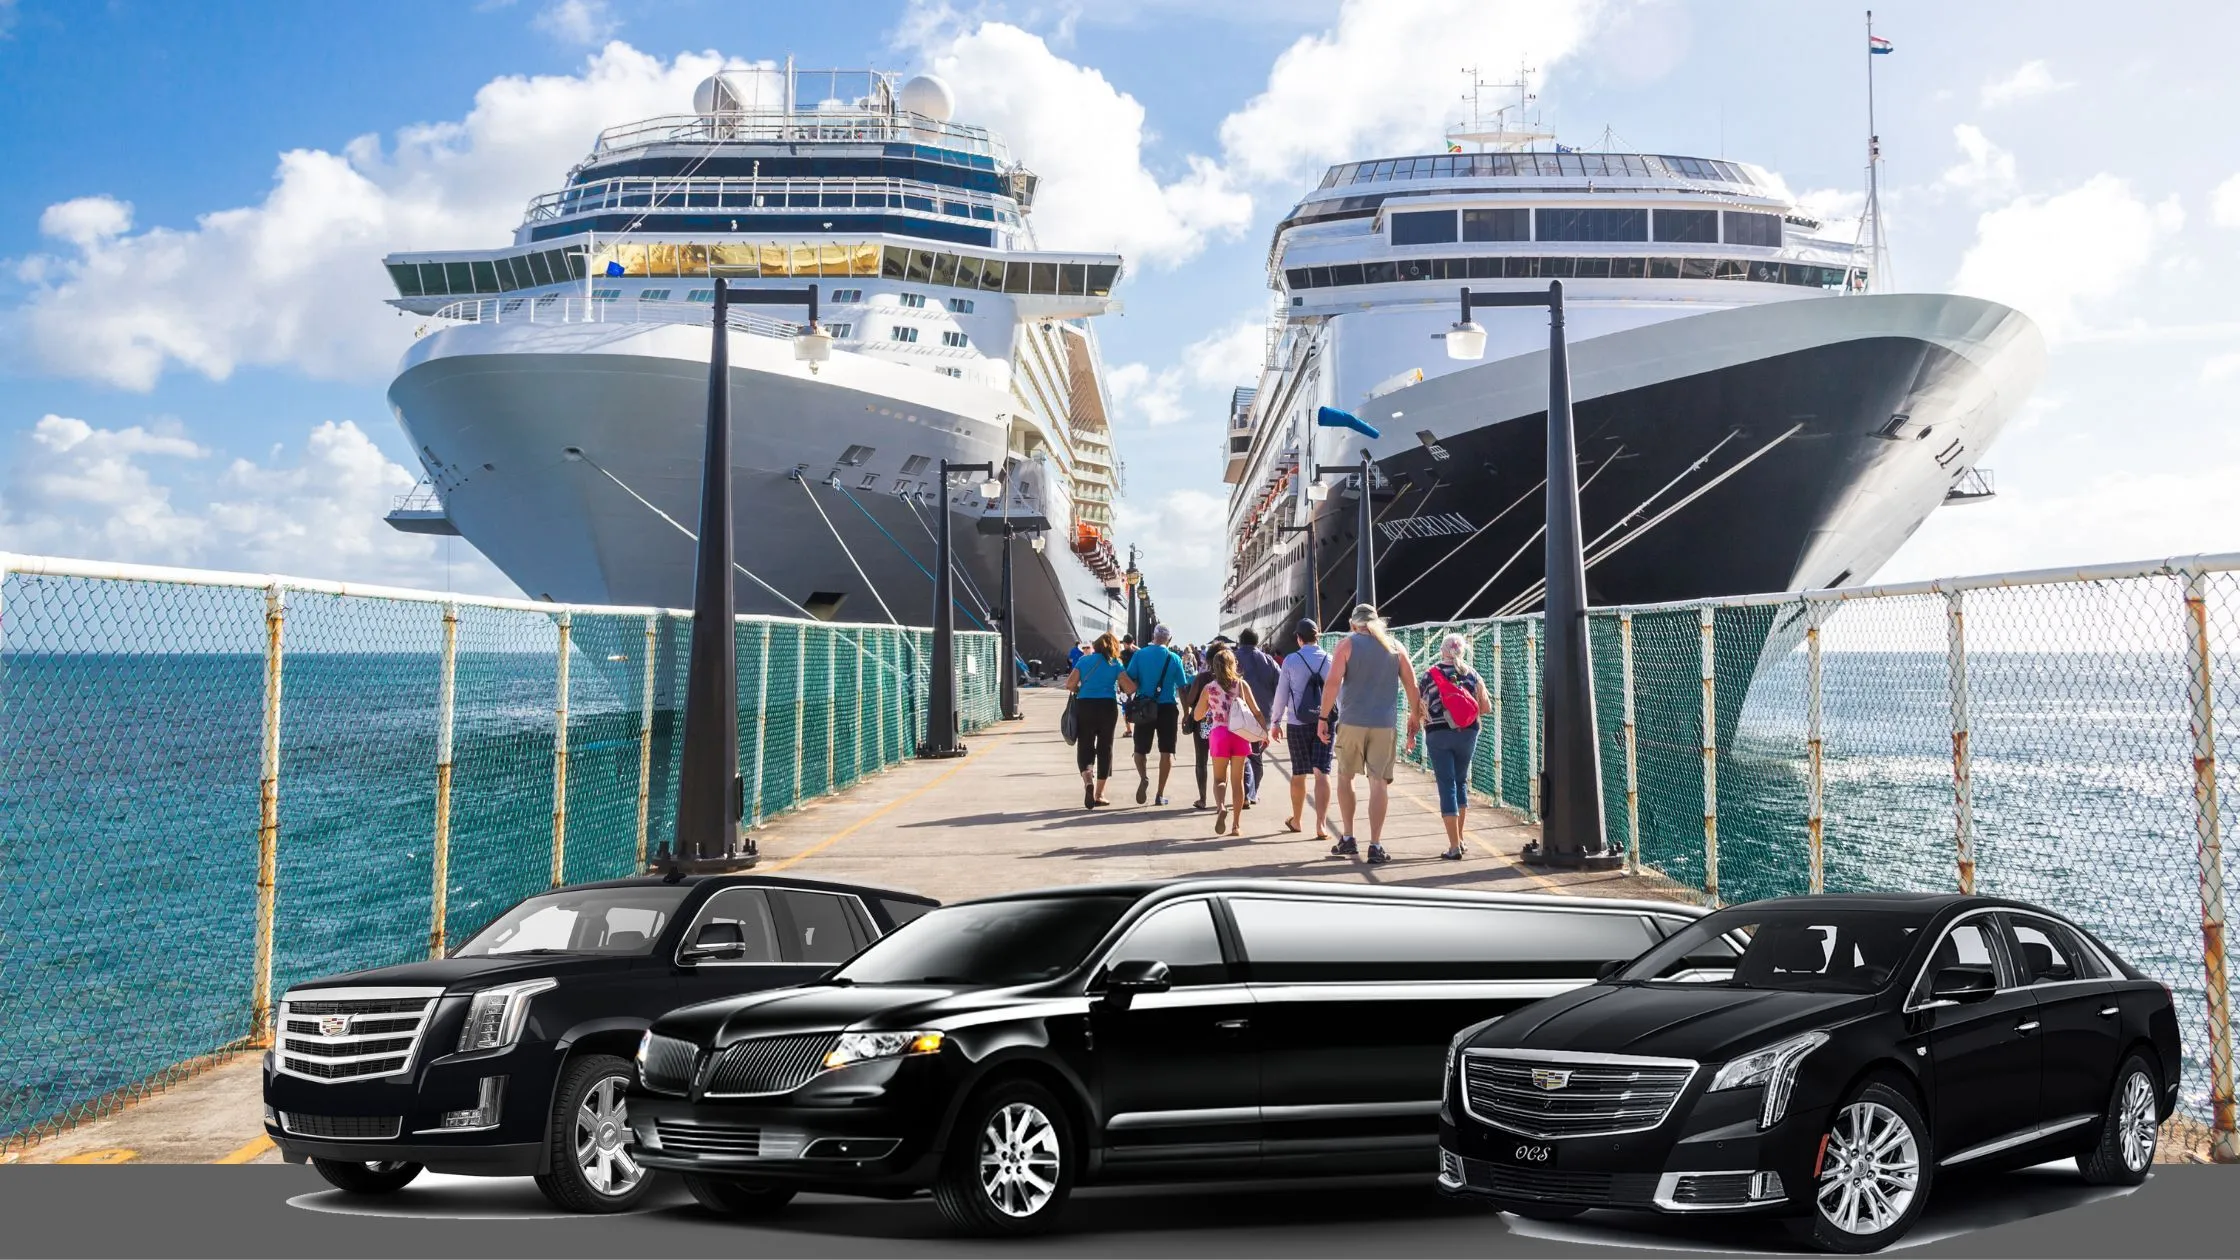 Get Chic Rides with Chicago Leisure Limo Rental & Transportation Services